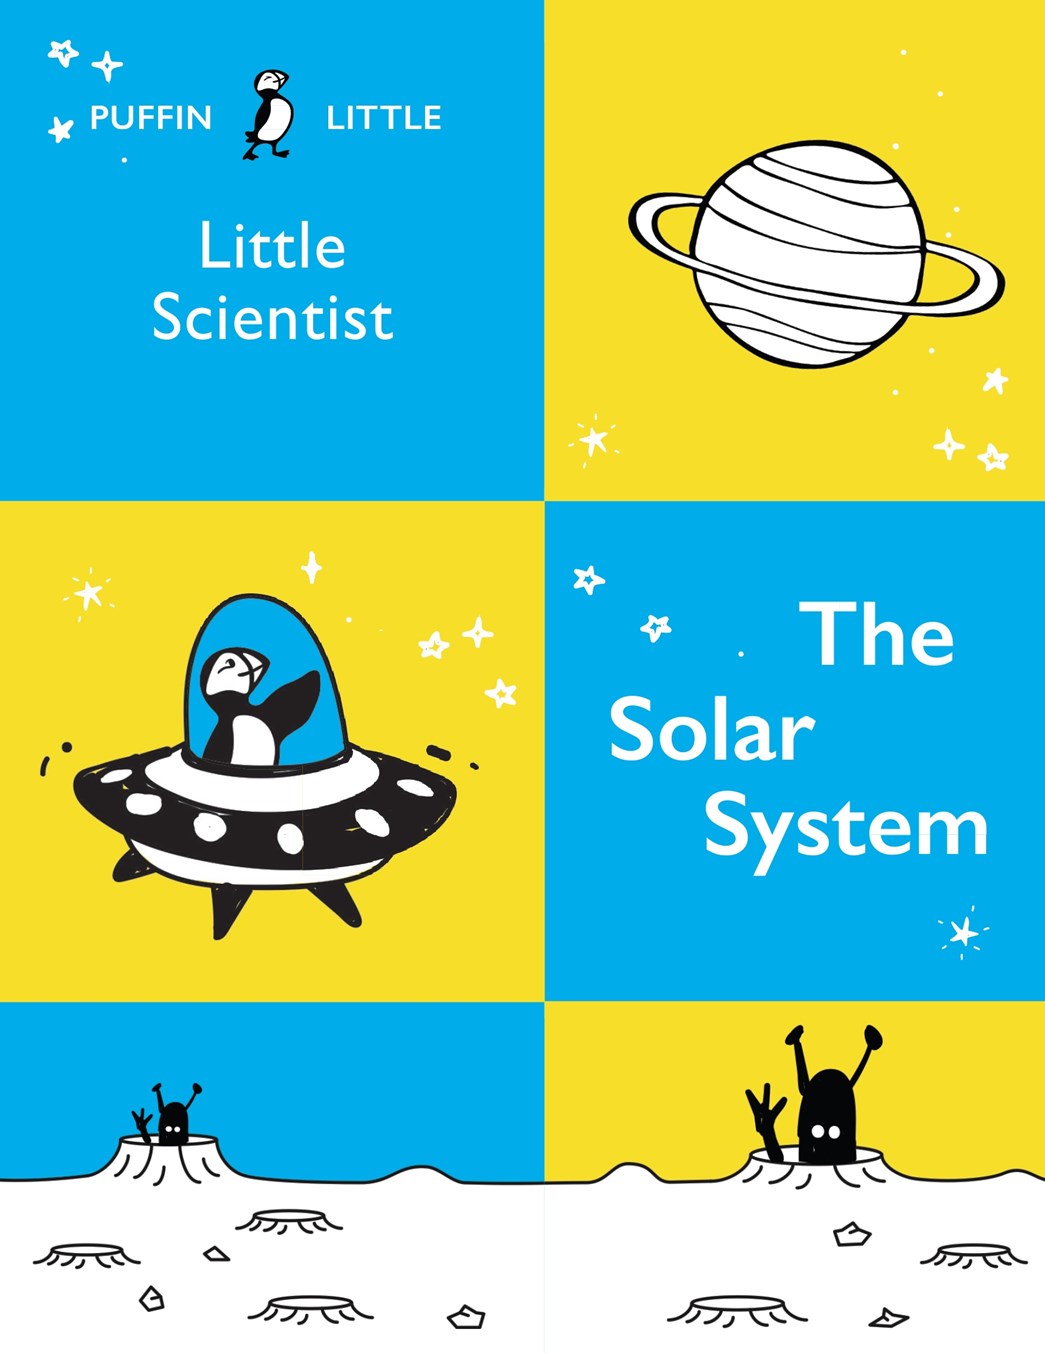 Book cover: The solar system